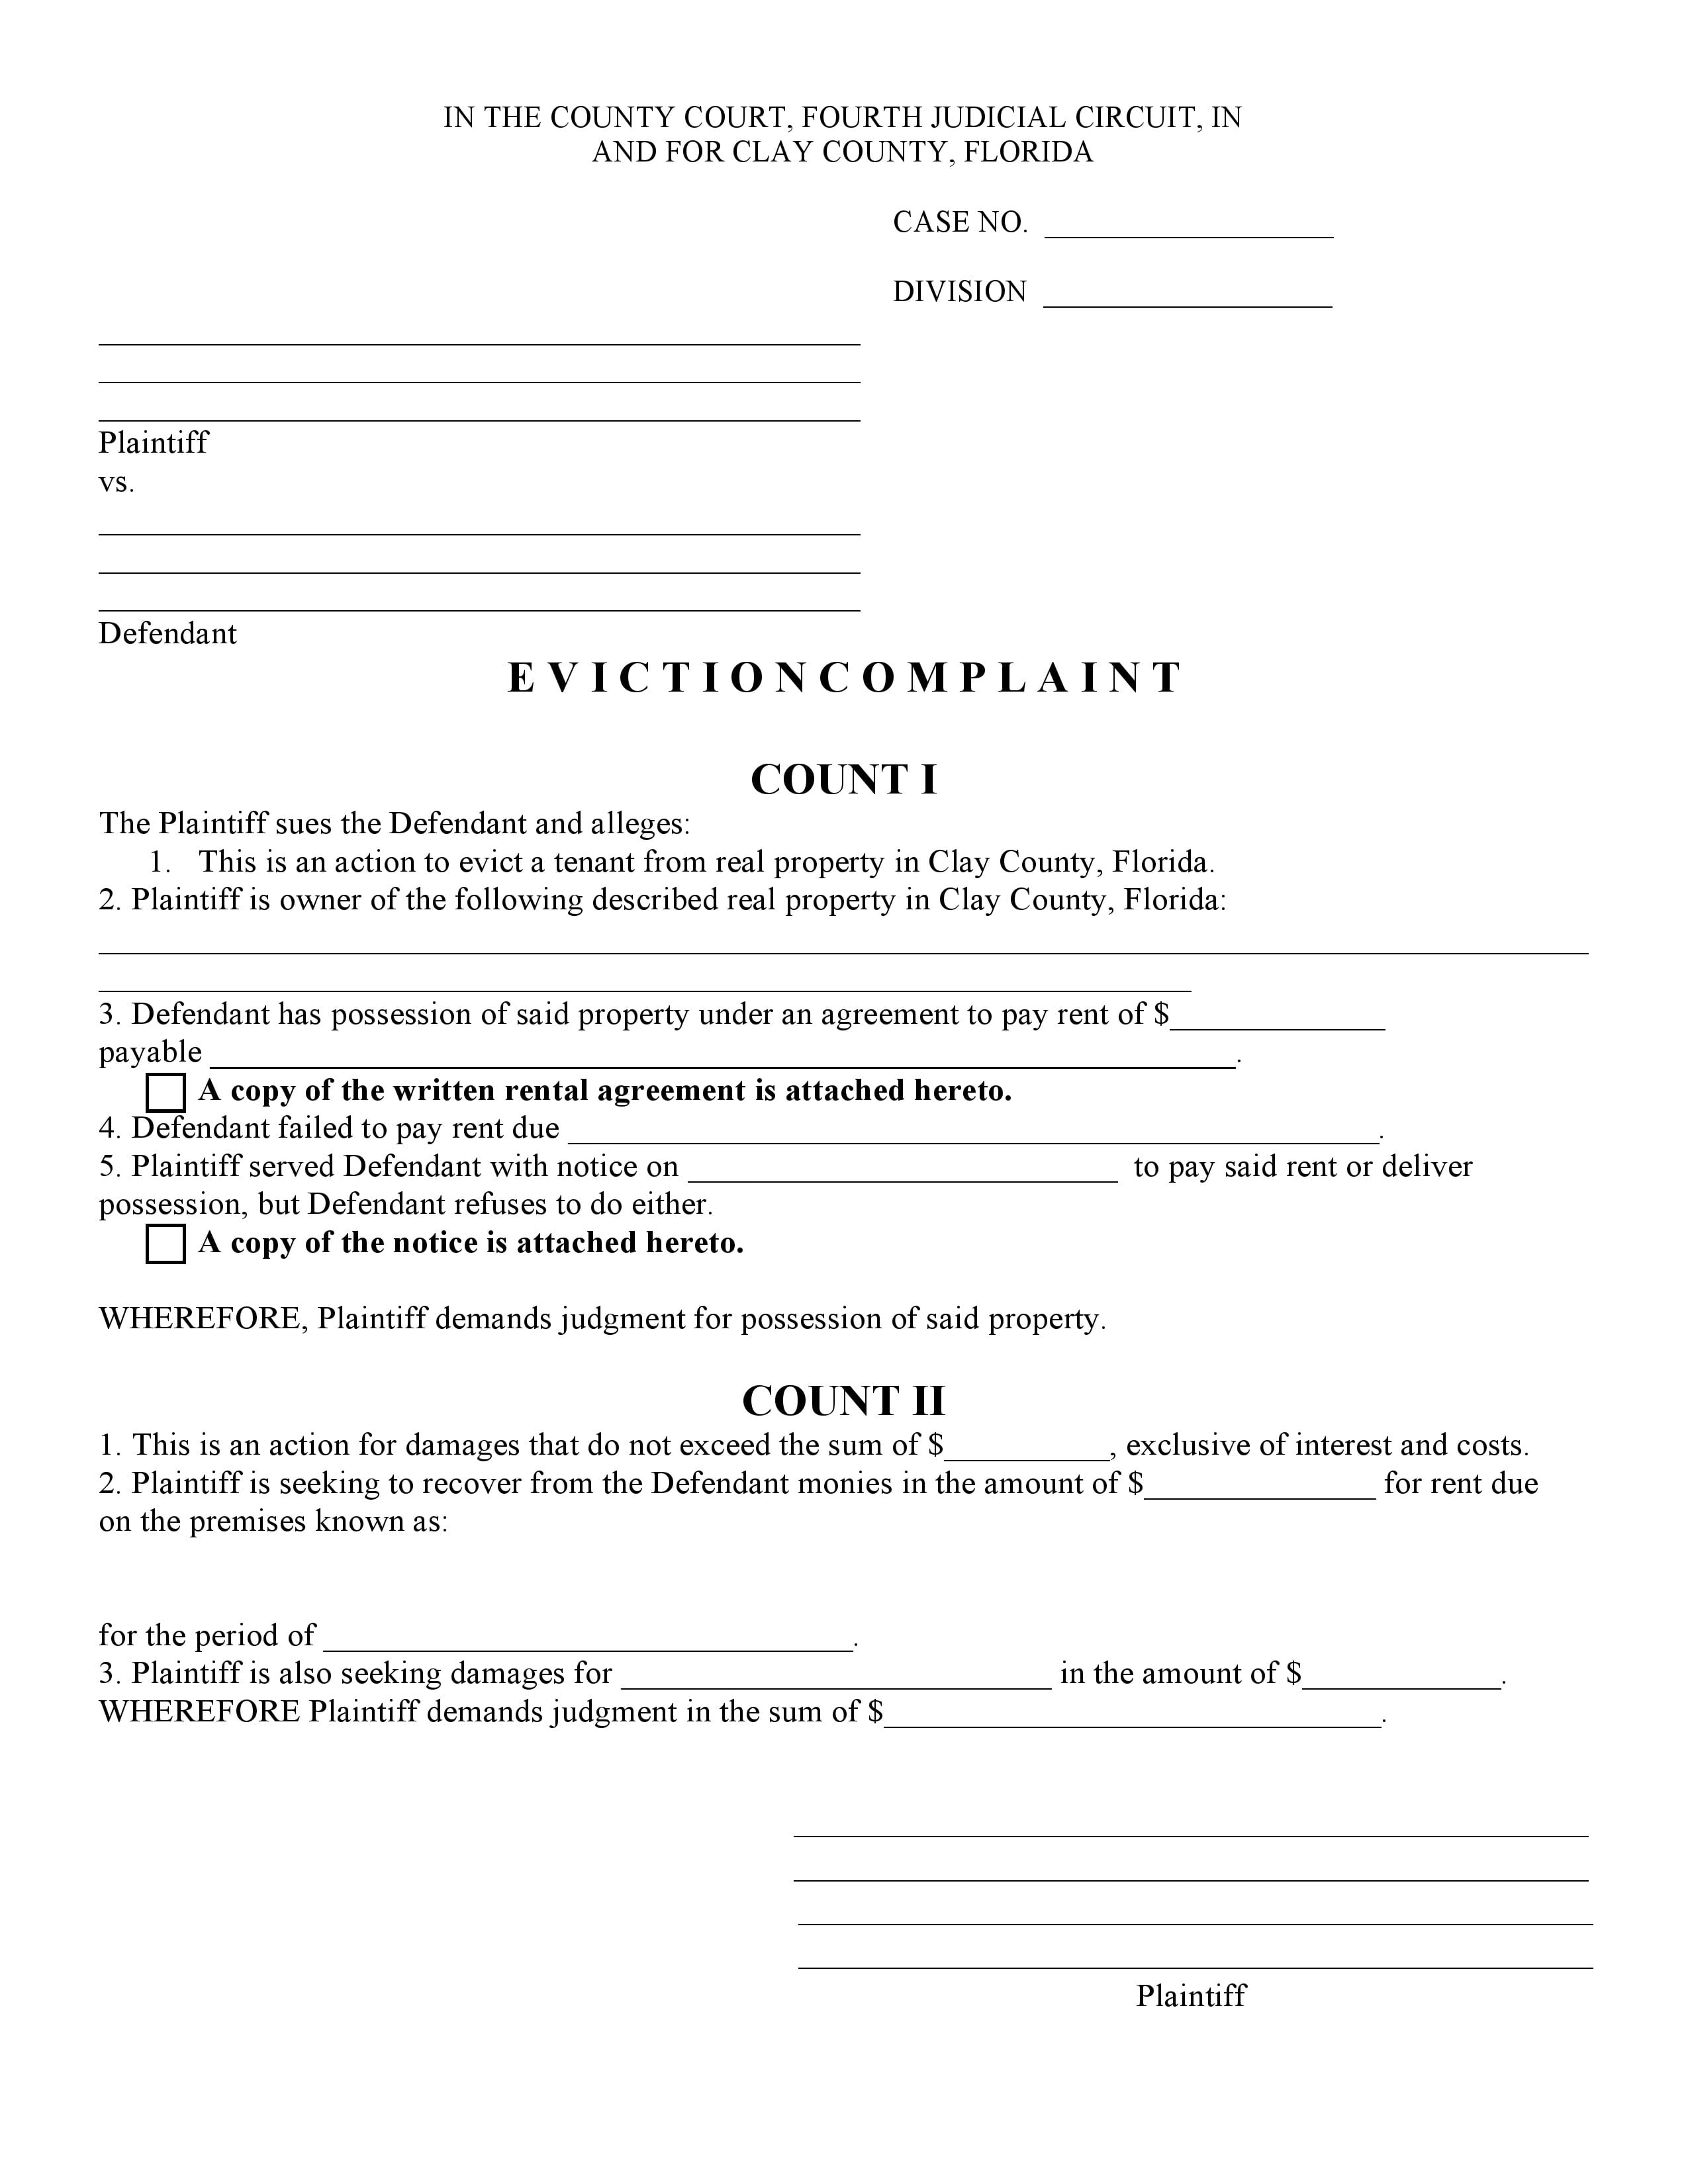 free-florida-eviction-complaint-pdf-template-form-download